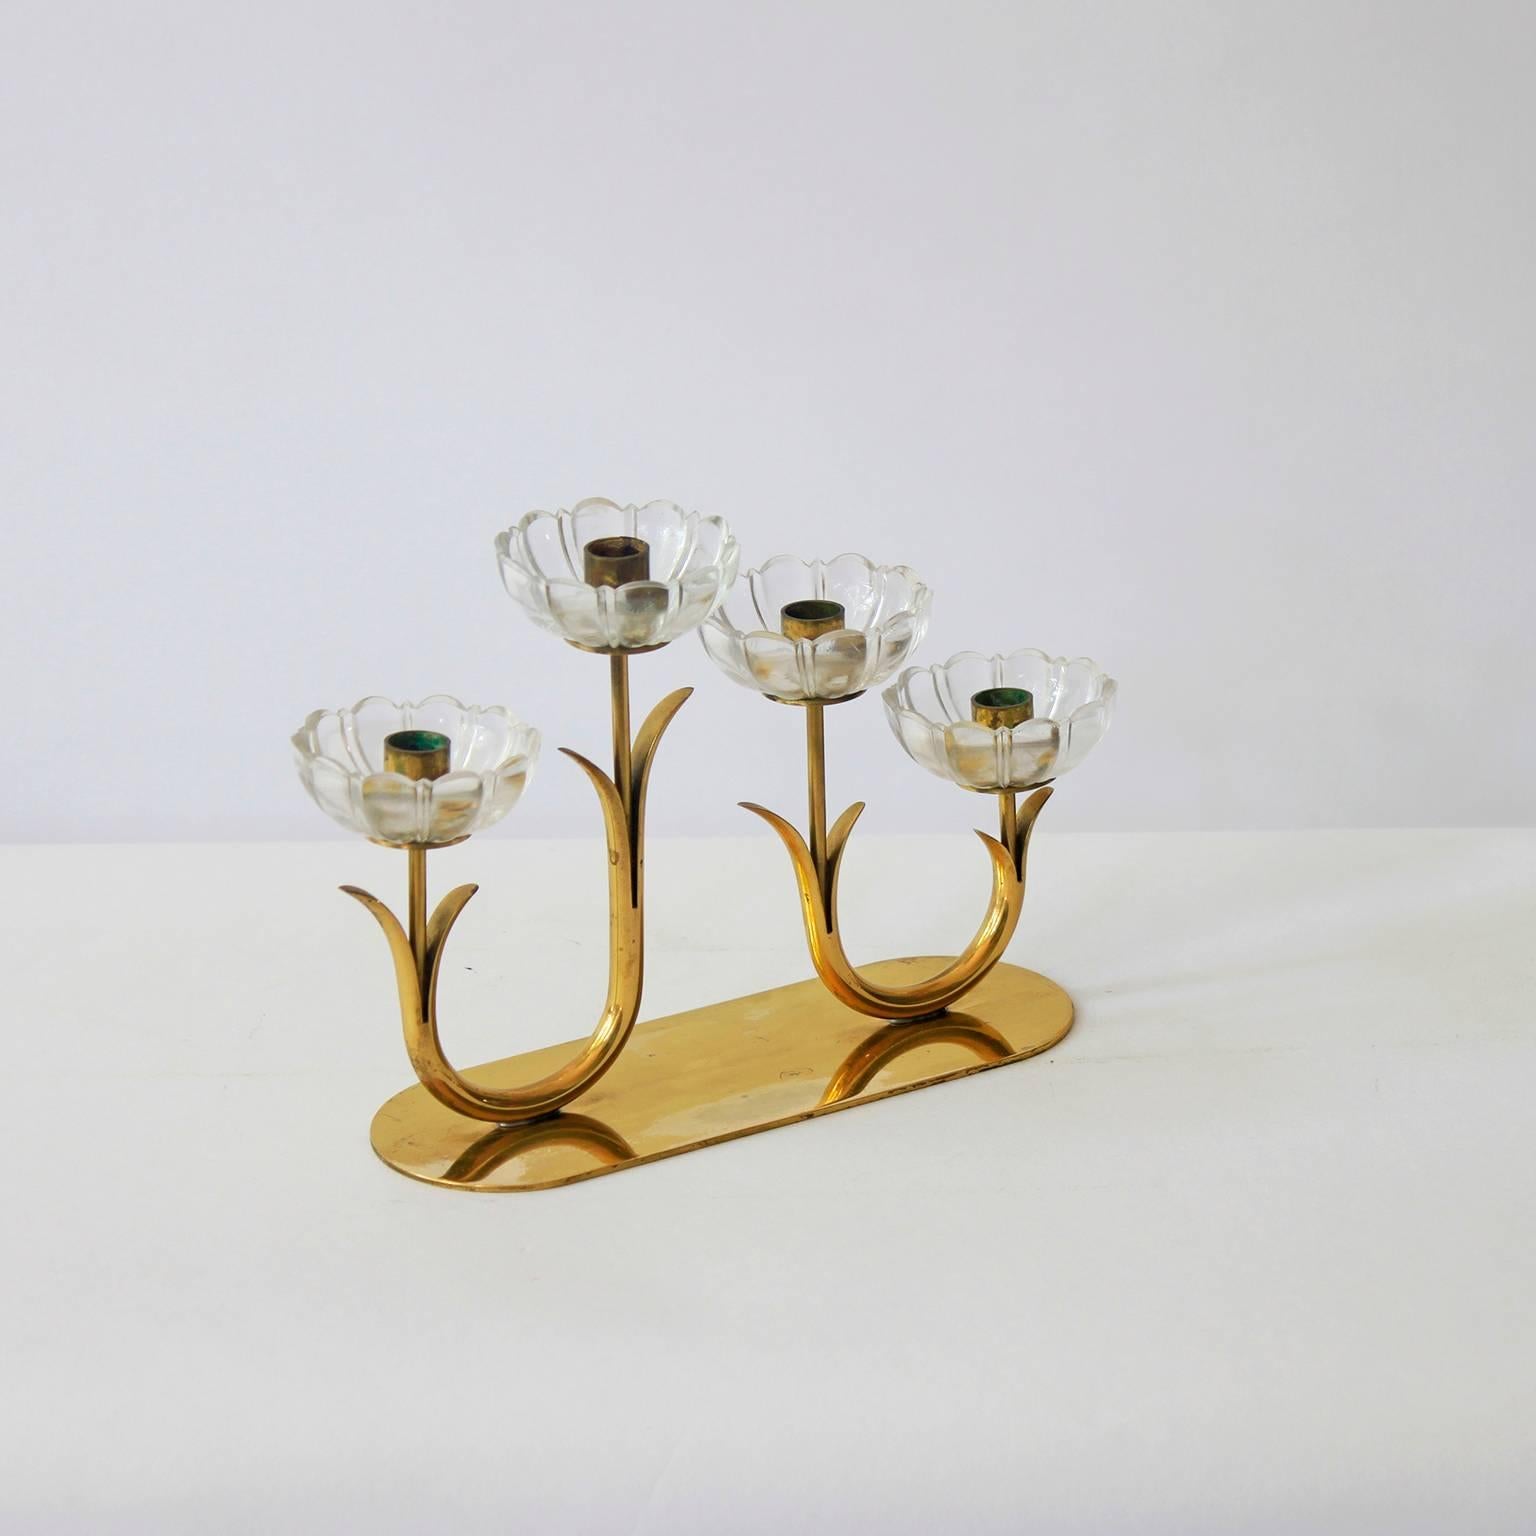 An elegant Swedish brass and glass flower candleholder comprising four clear glass flowers arranged on a brass platter. Designed by Gunnar Ander and marked by the manufacturer, Ystad Metall, on the base.